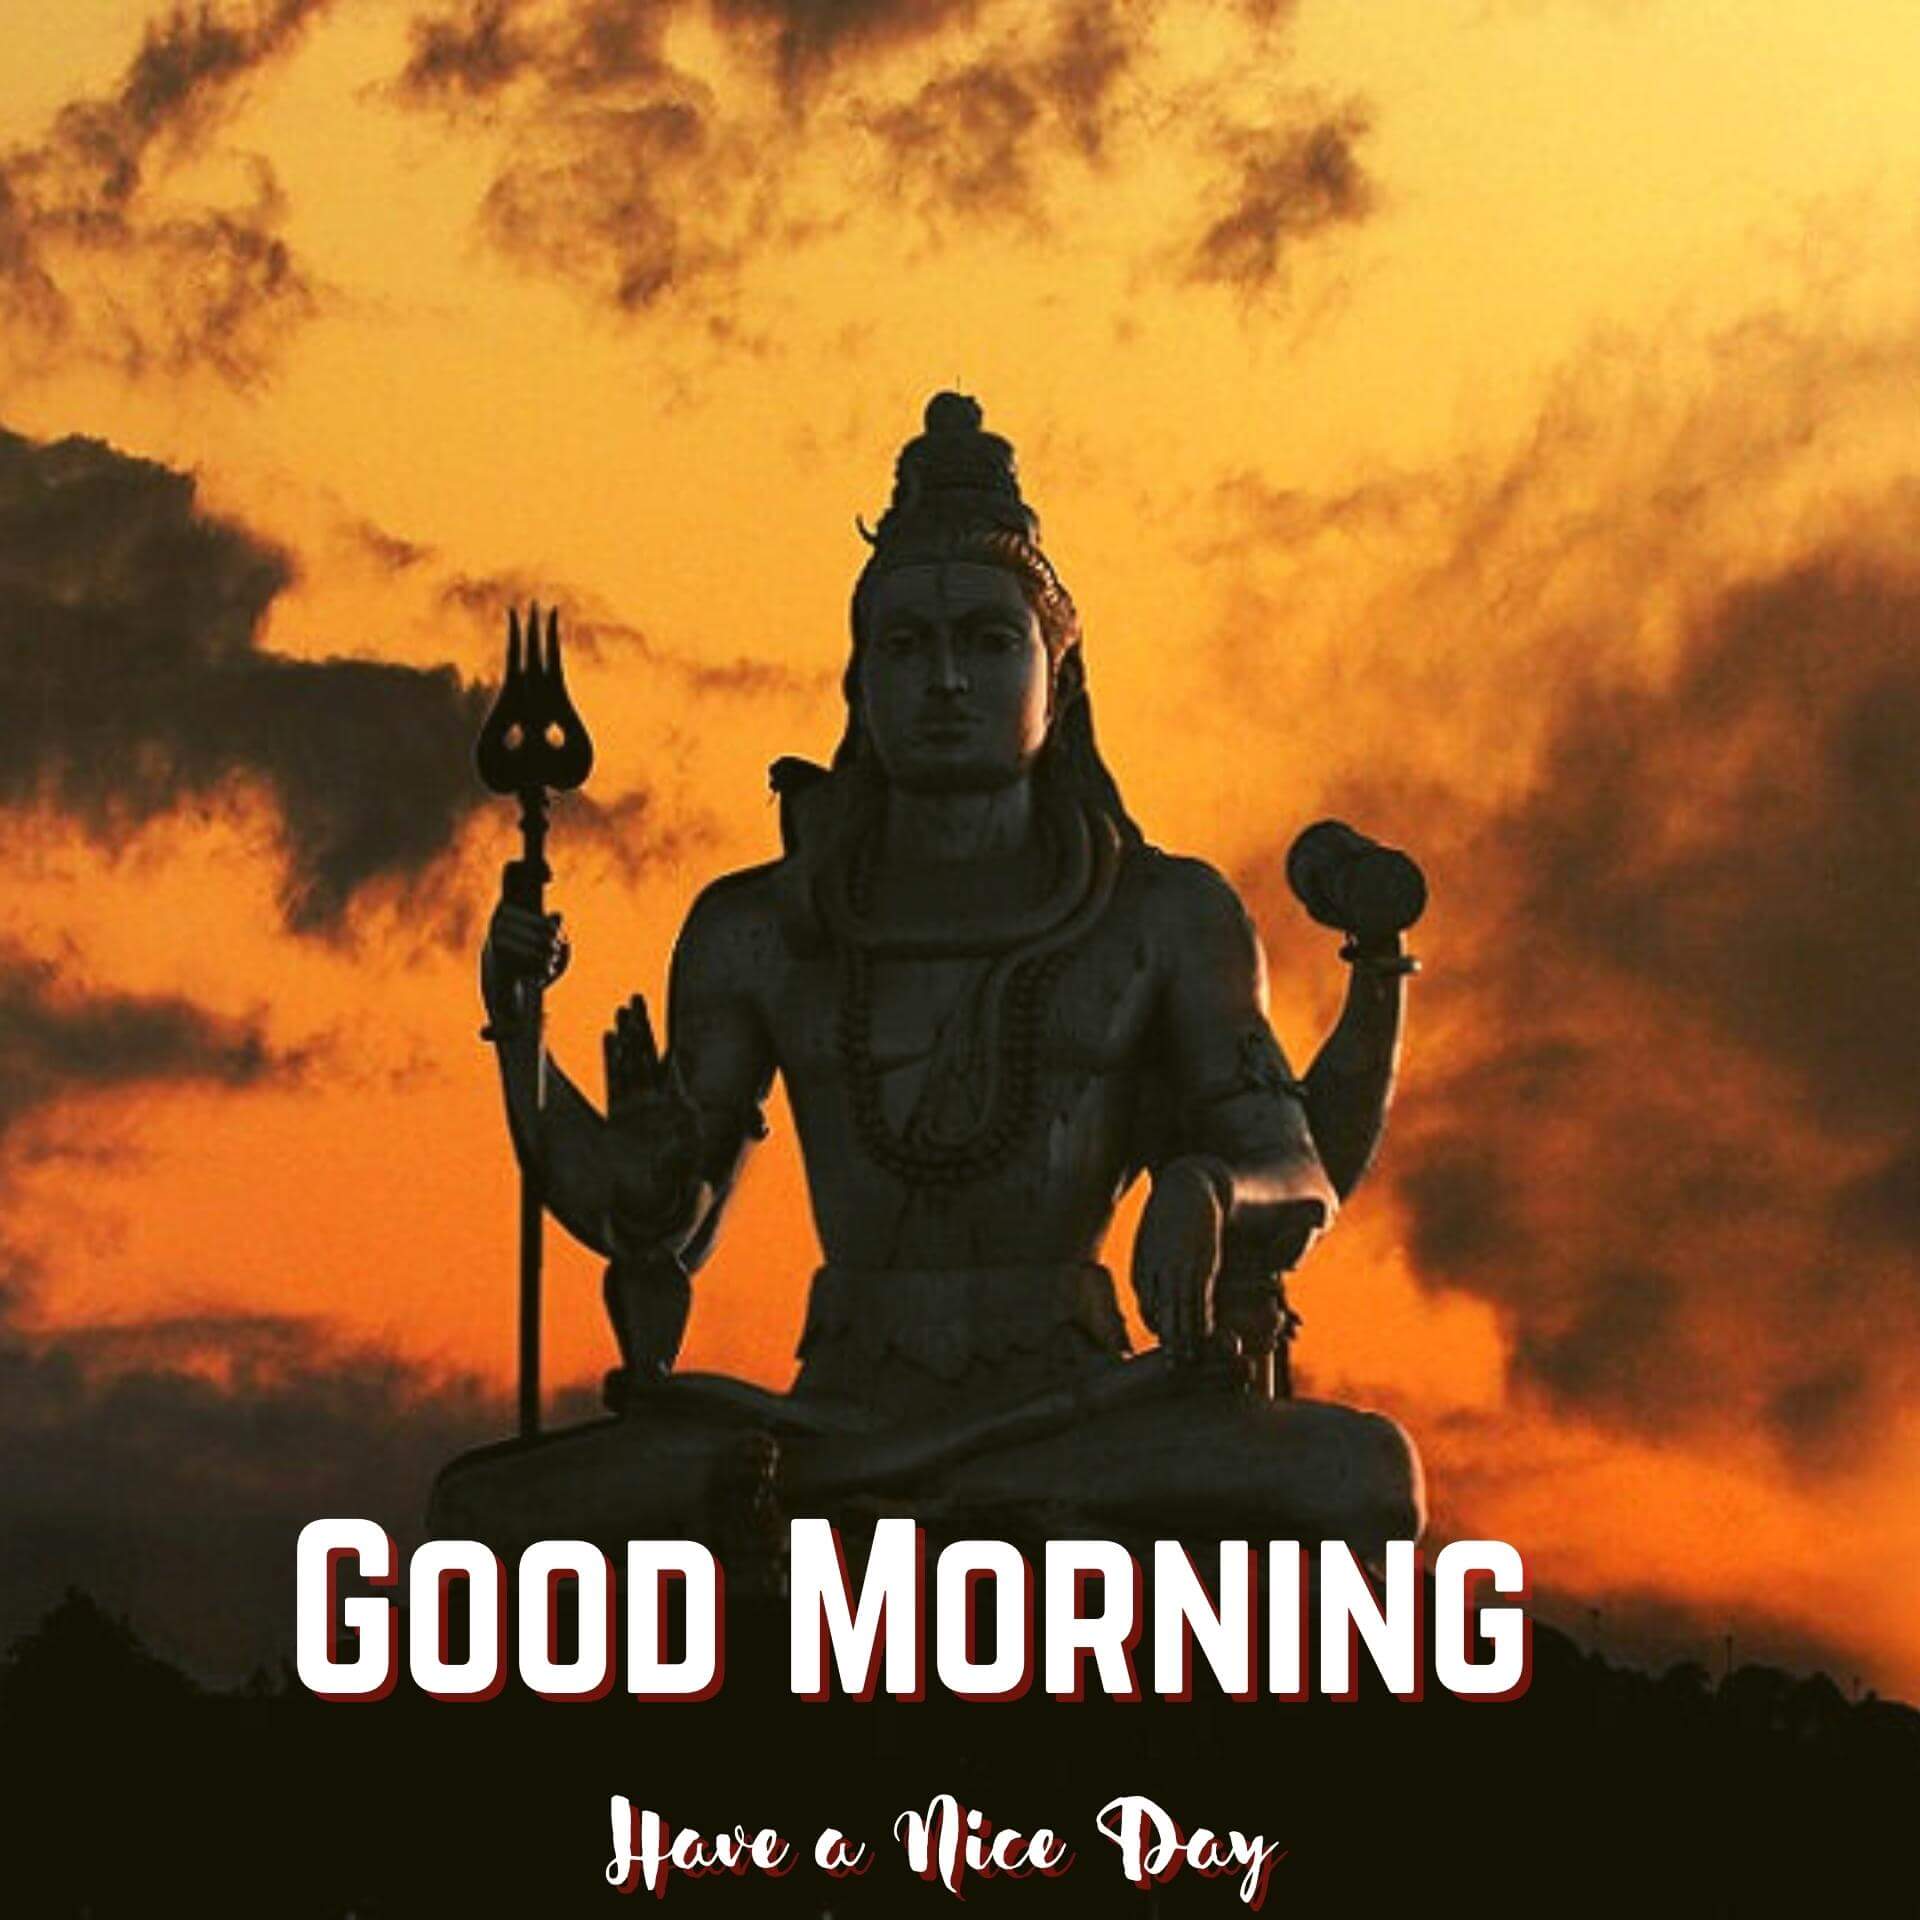 Shiva Good Morning Pics Images Download for Facebook